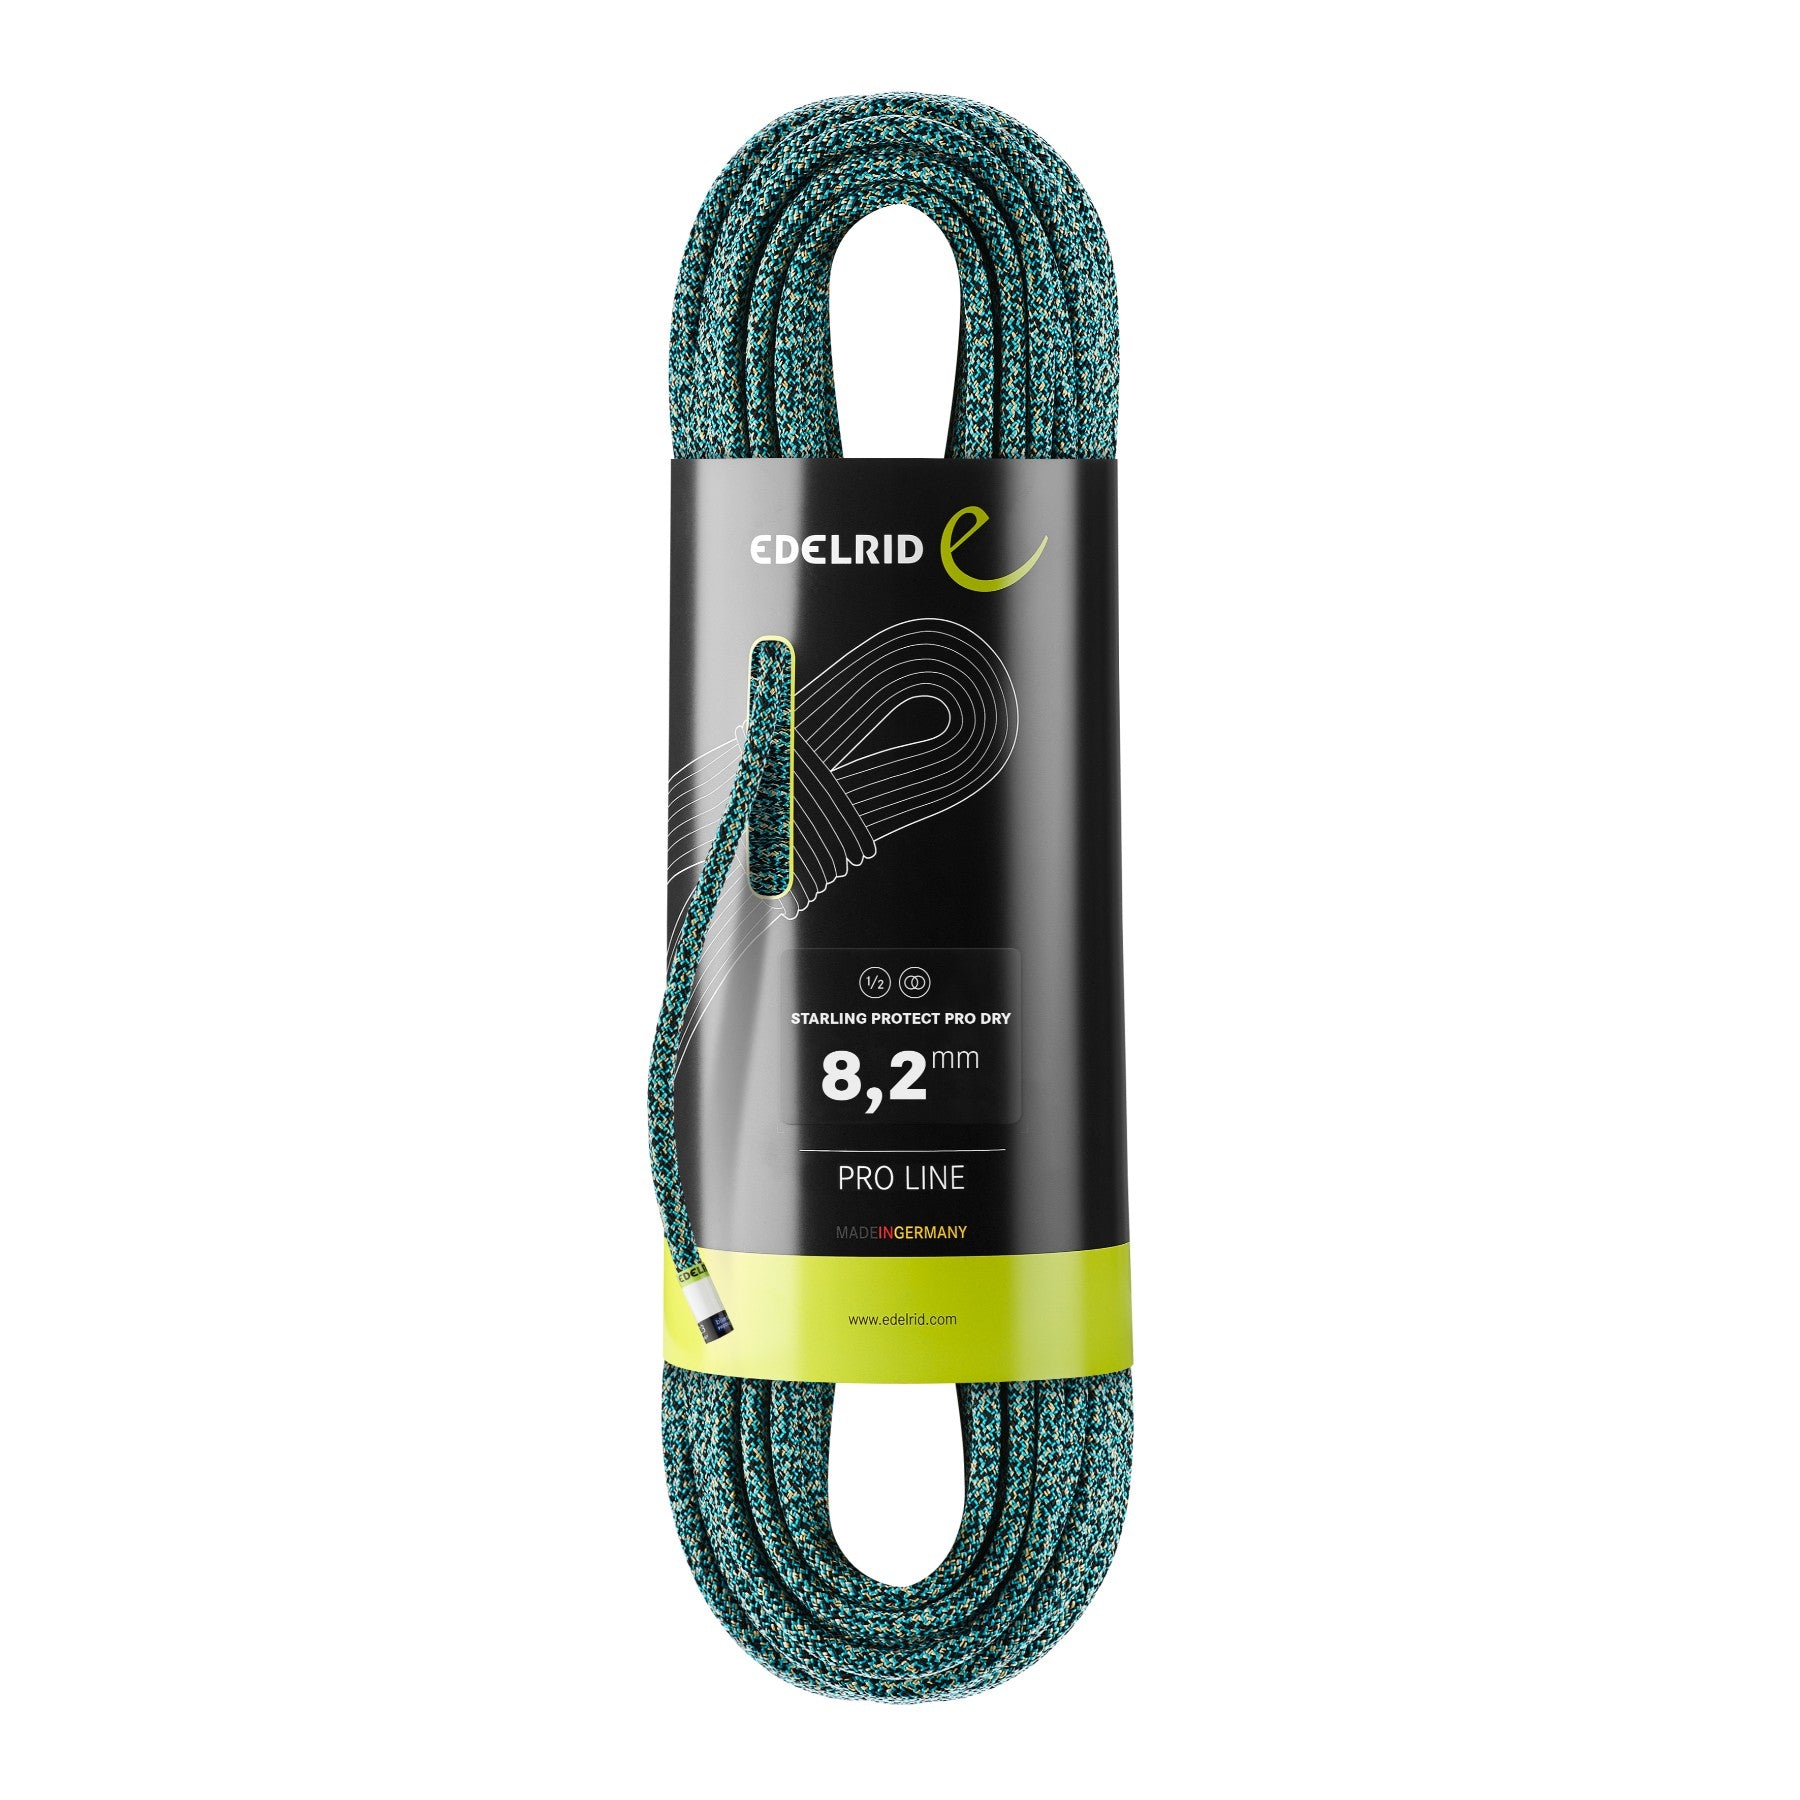 Edelrid Starling Protect Pro Dry 8.2mm x 60m, Colour Yellow-Night